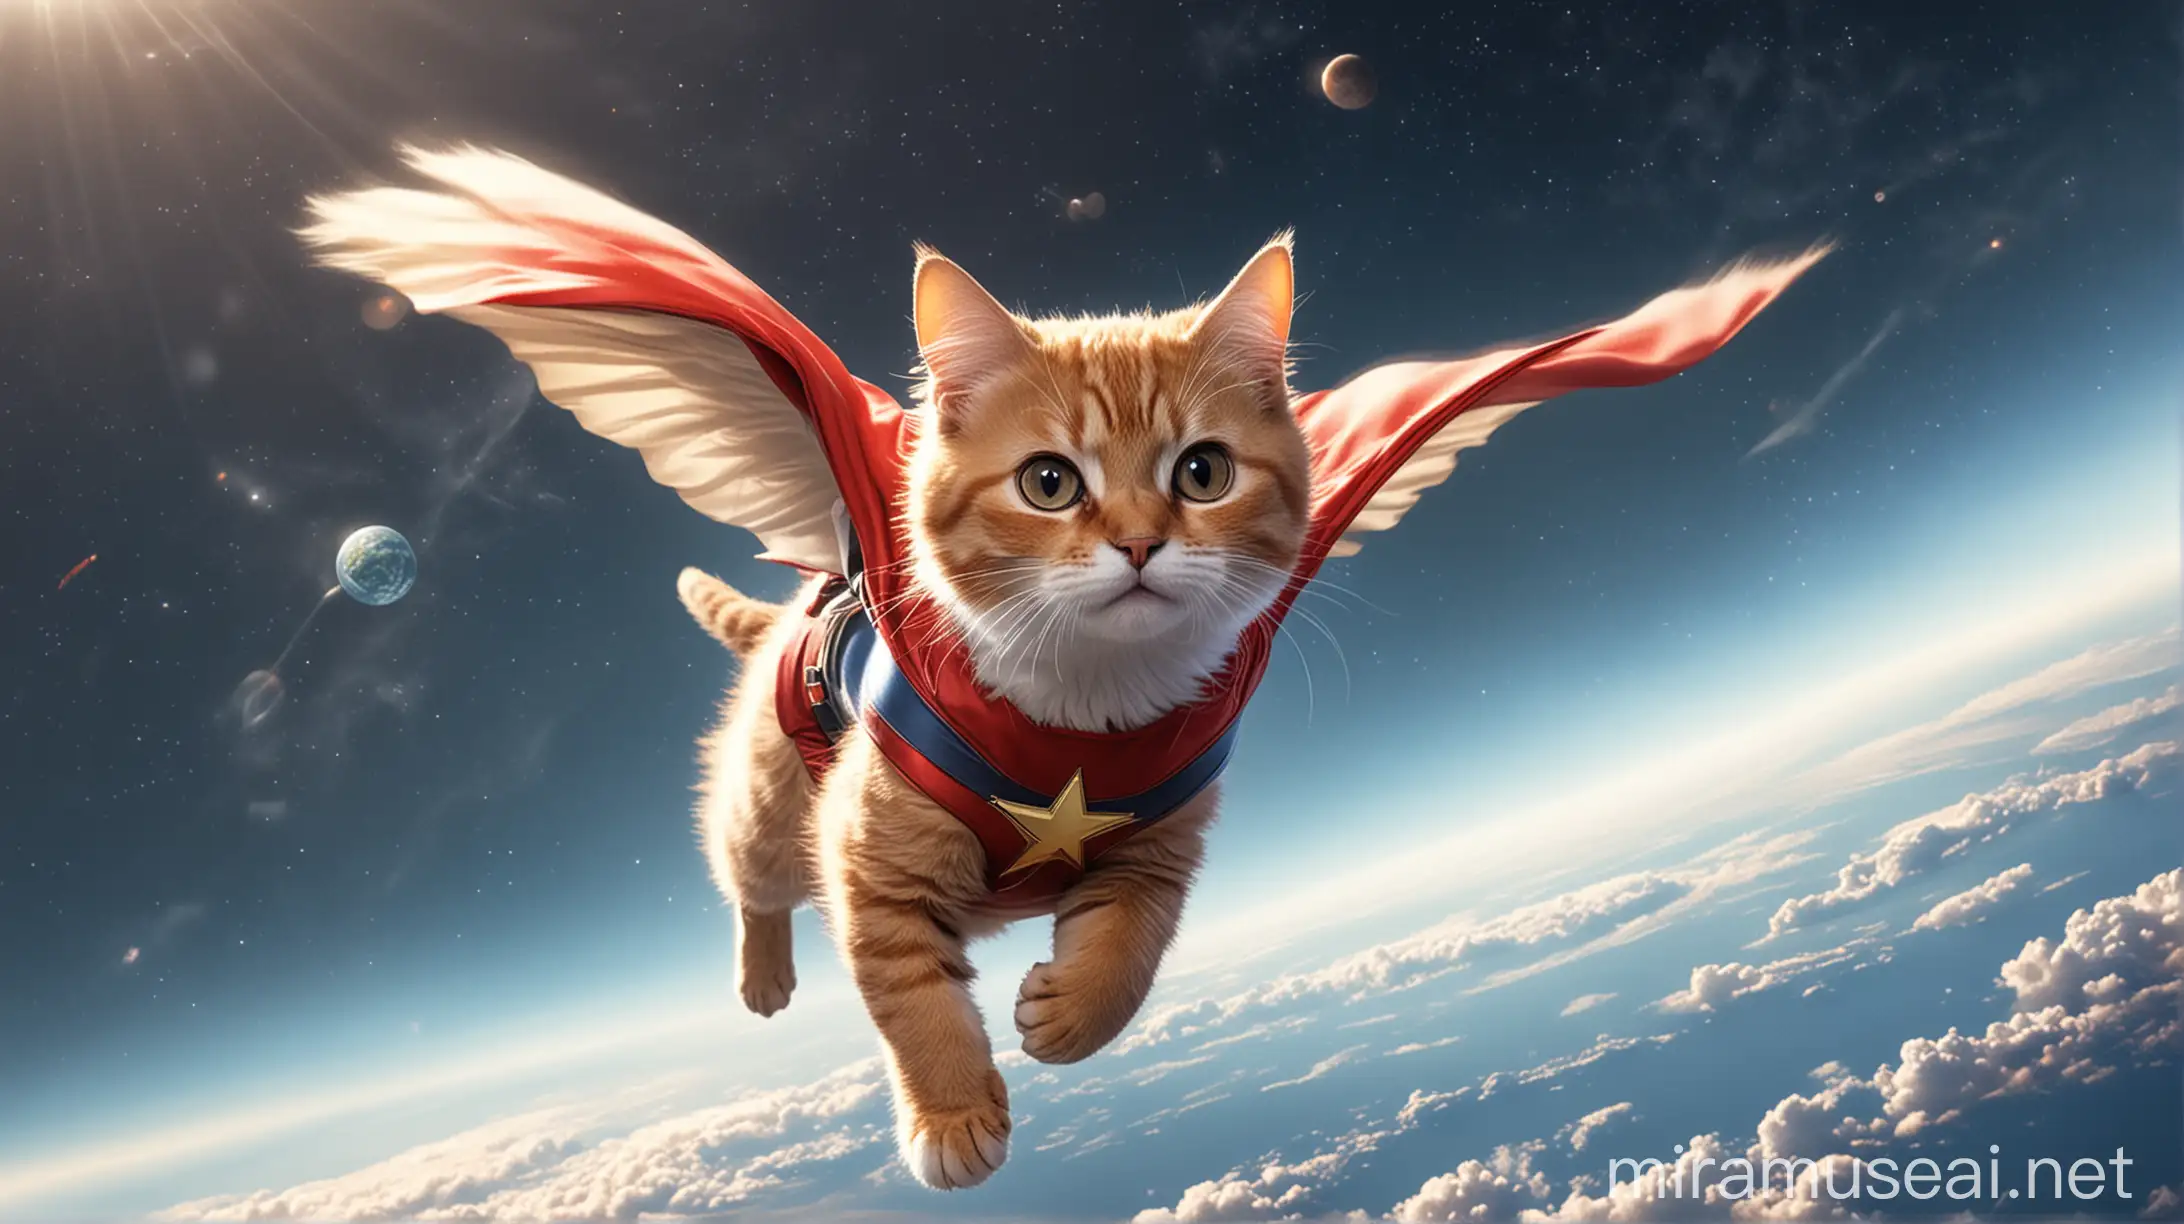 A superhero cat, flying over the earth, it is cute